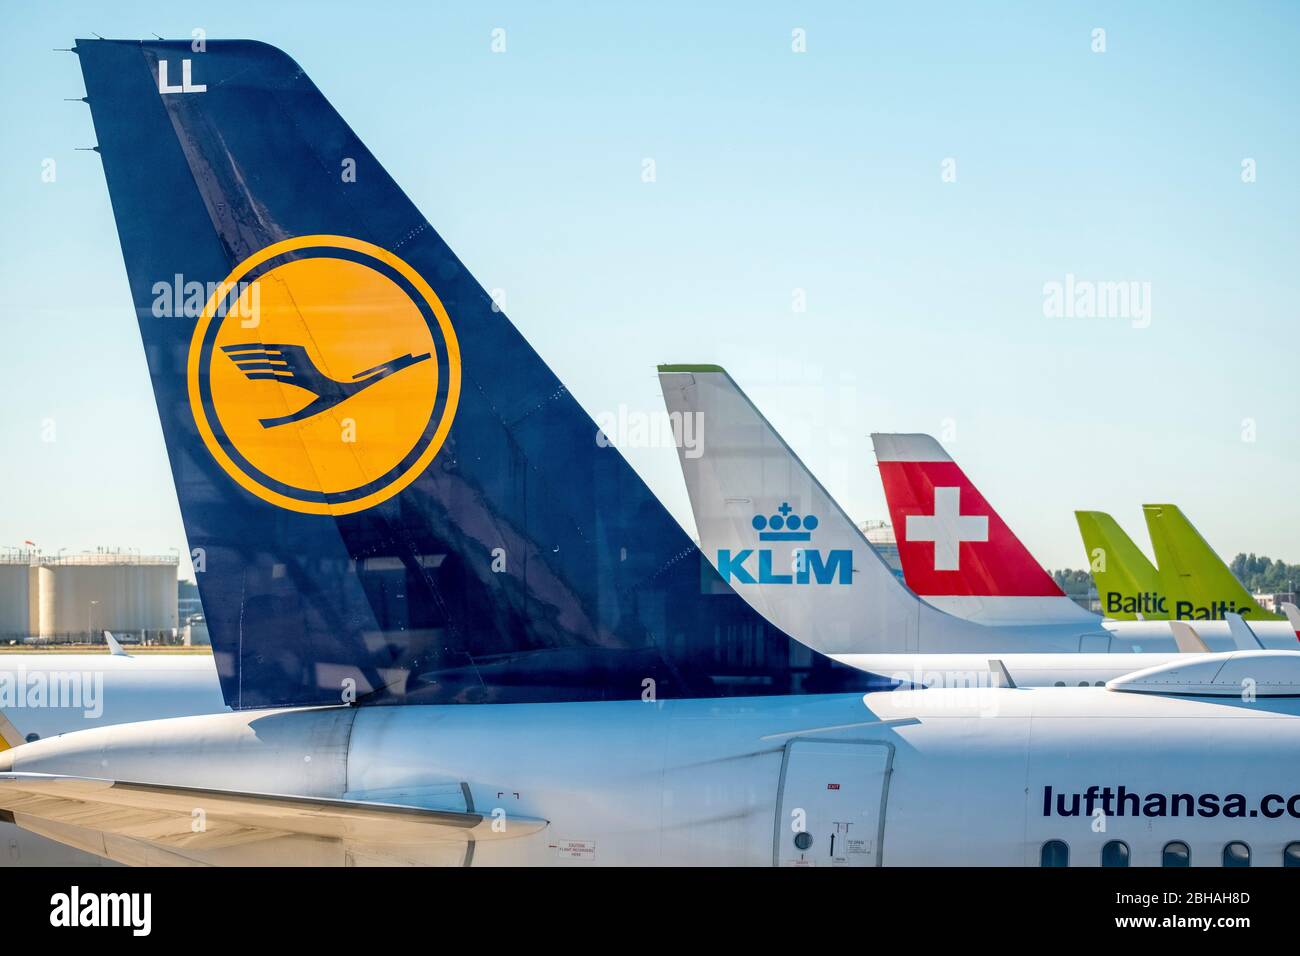 Vertical stabilizers of the airlines Lufthansa, KLM, Swiss Air and Baltic Air at Amsterdam Schiphol Airport, Noord-Holland, Netherlands, Europe Stock Photo